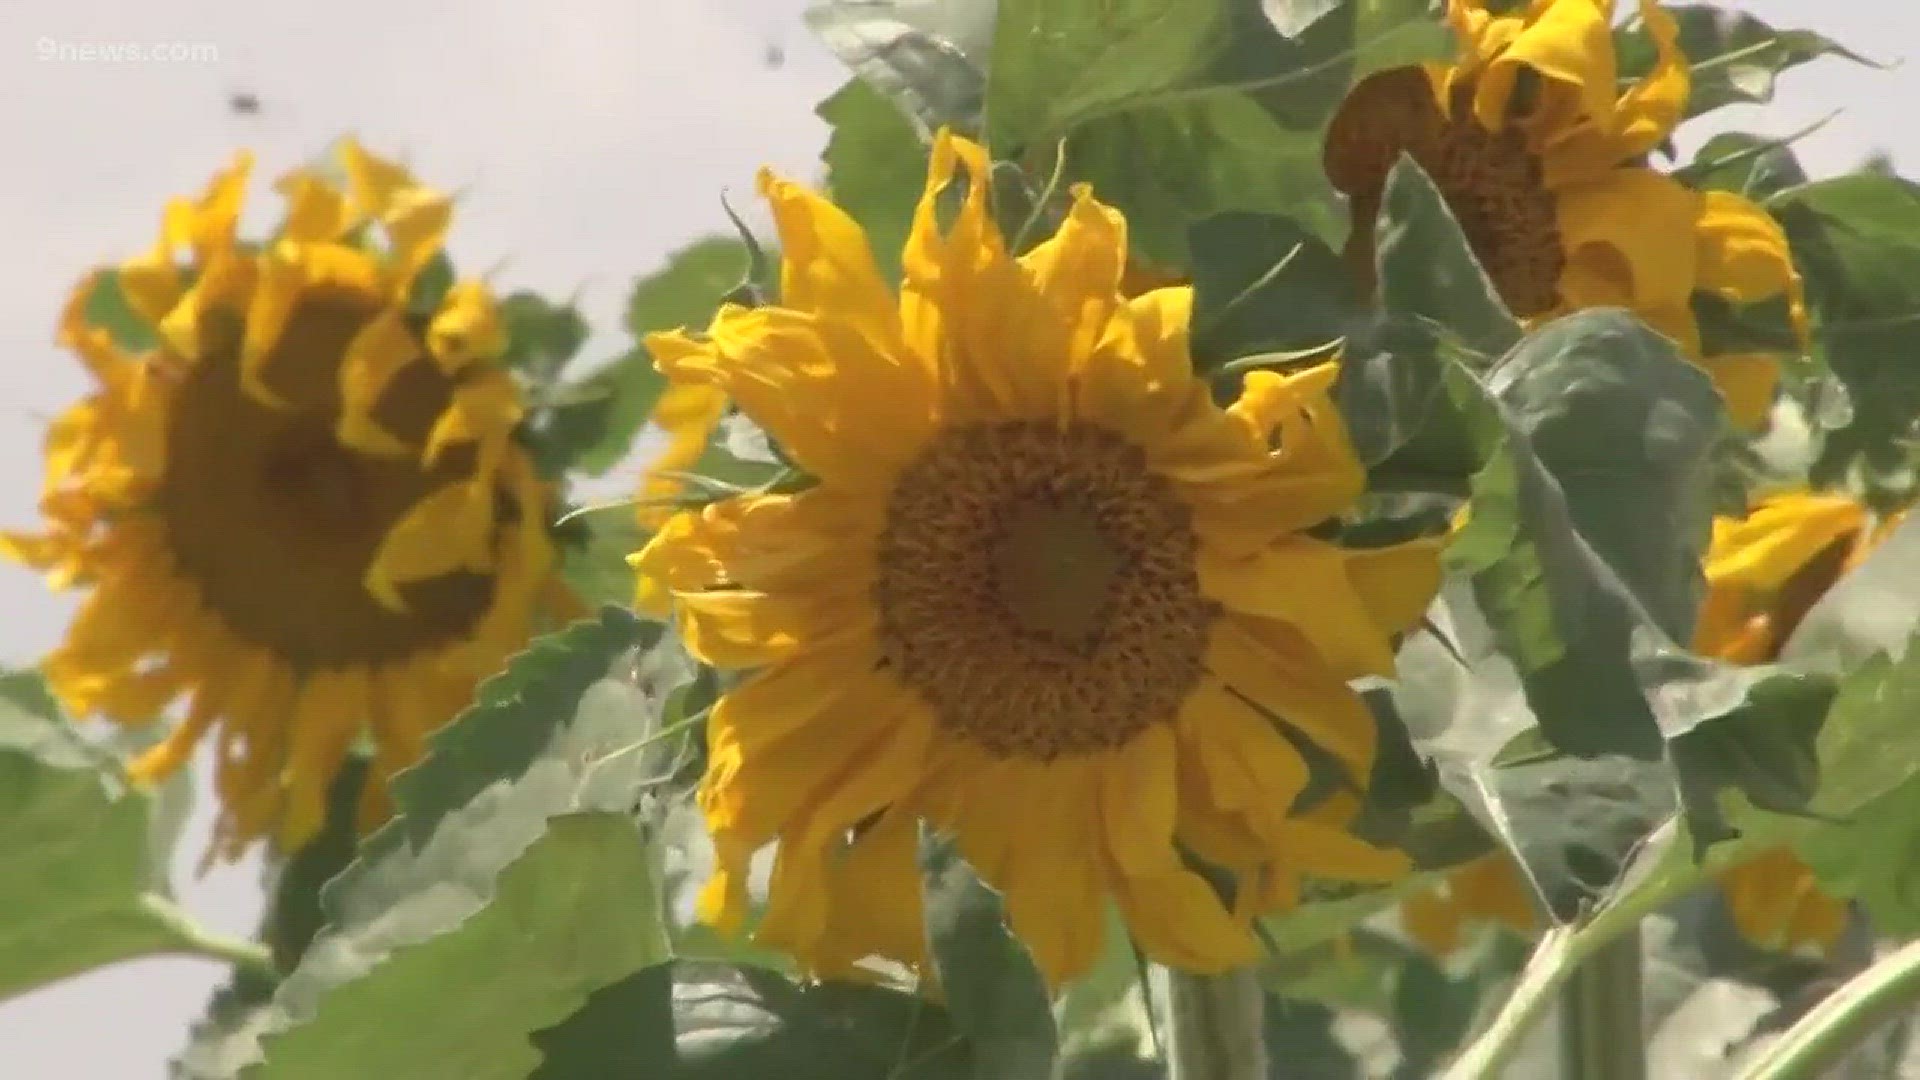 Colorado's sunflowers are now in full bloom, so if you want to take in the natural beauty, you'll have a few weeks to do it.